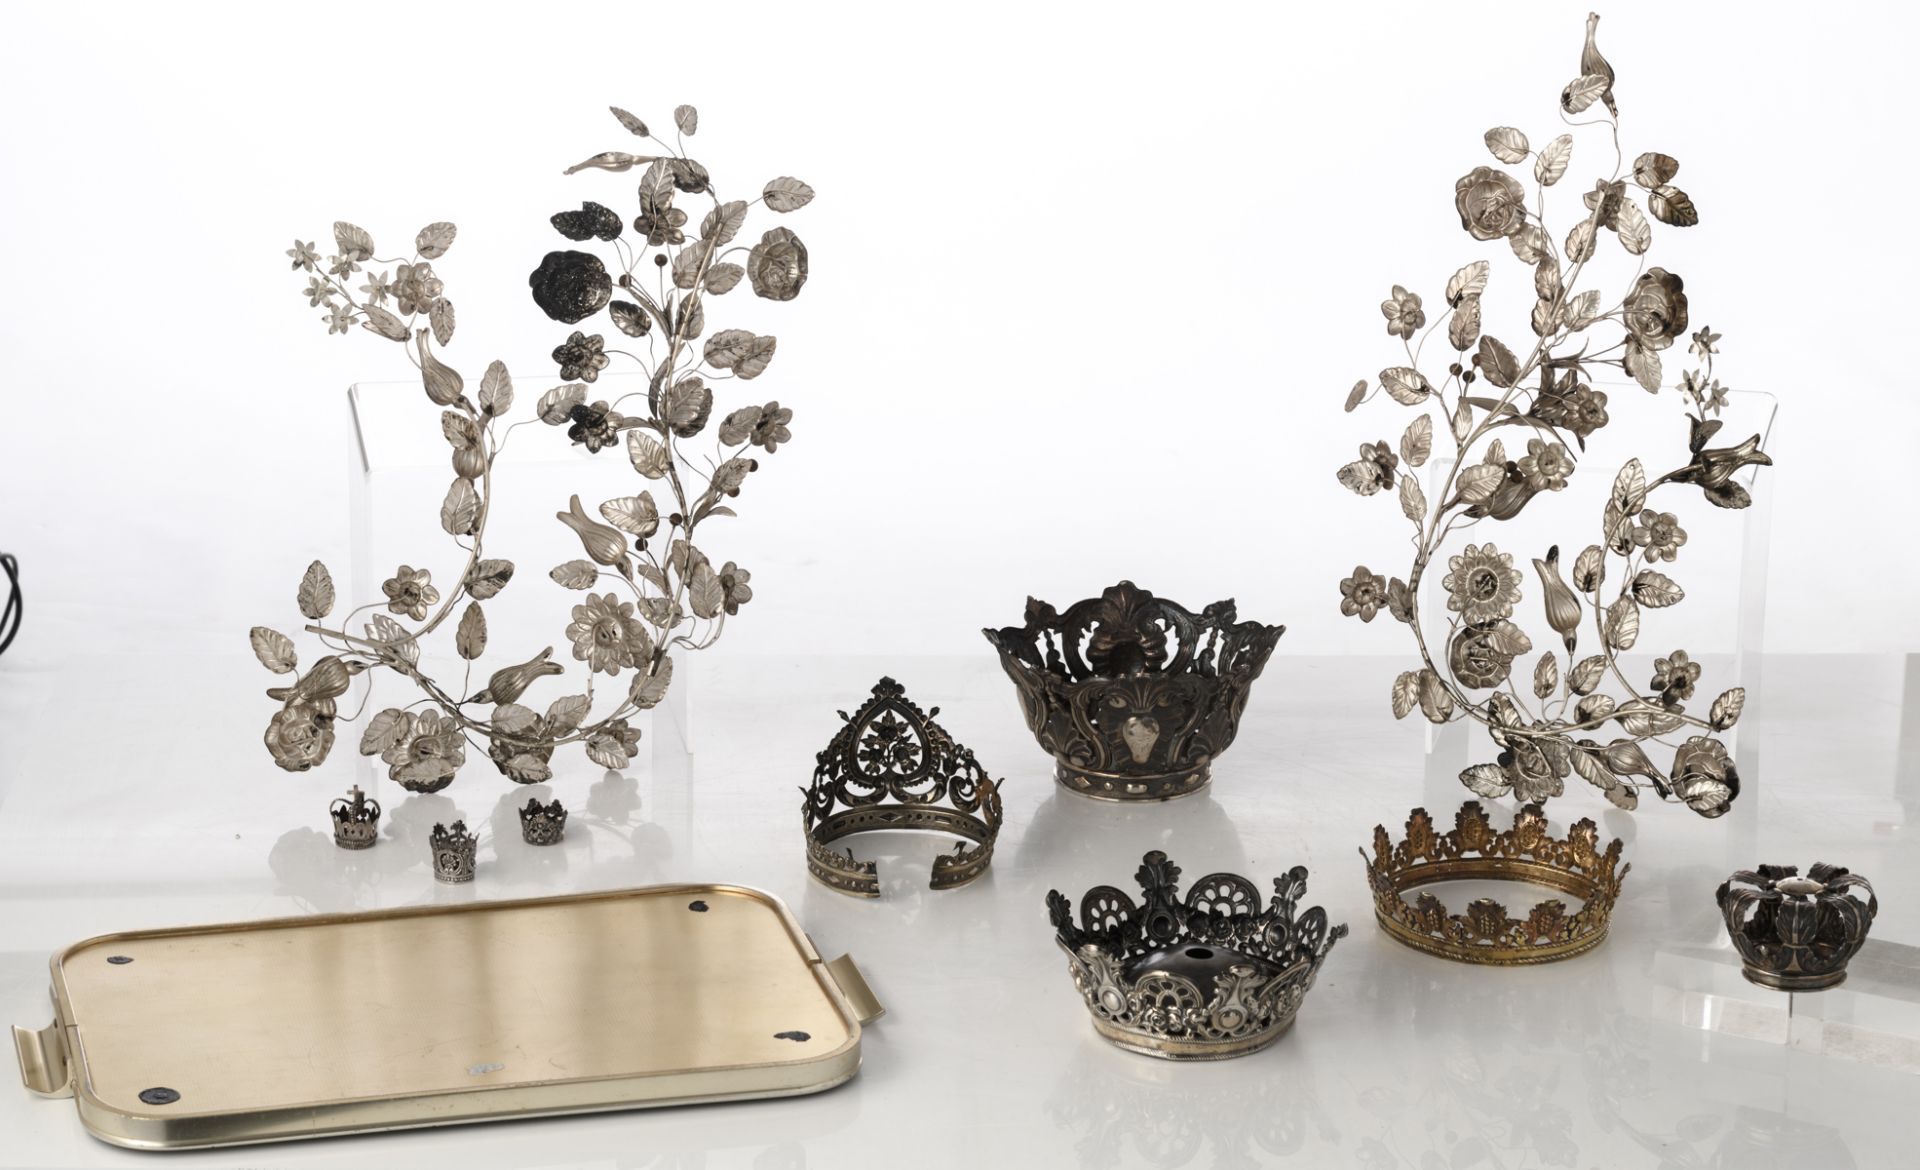 A set of silver crowns fitting for Holy Mother and Child statues, mostly Belgian and French - Image 2 of 3